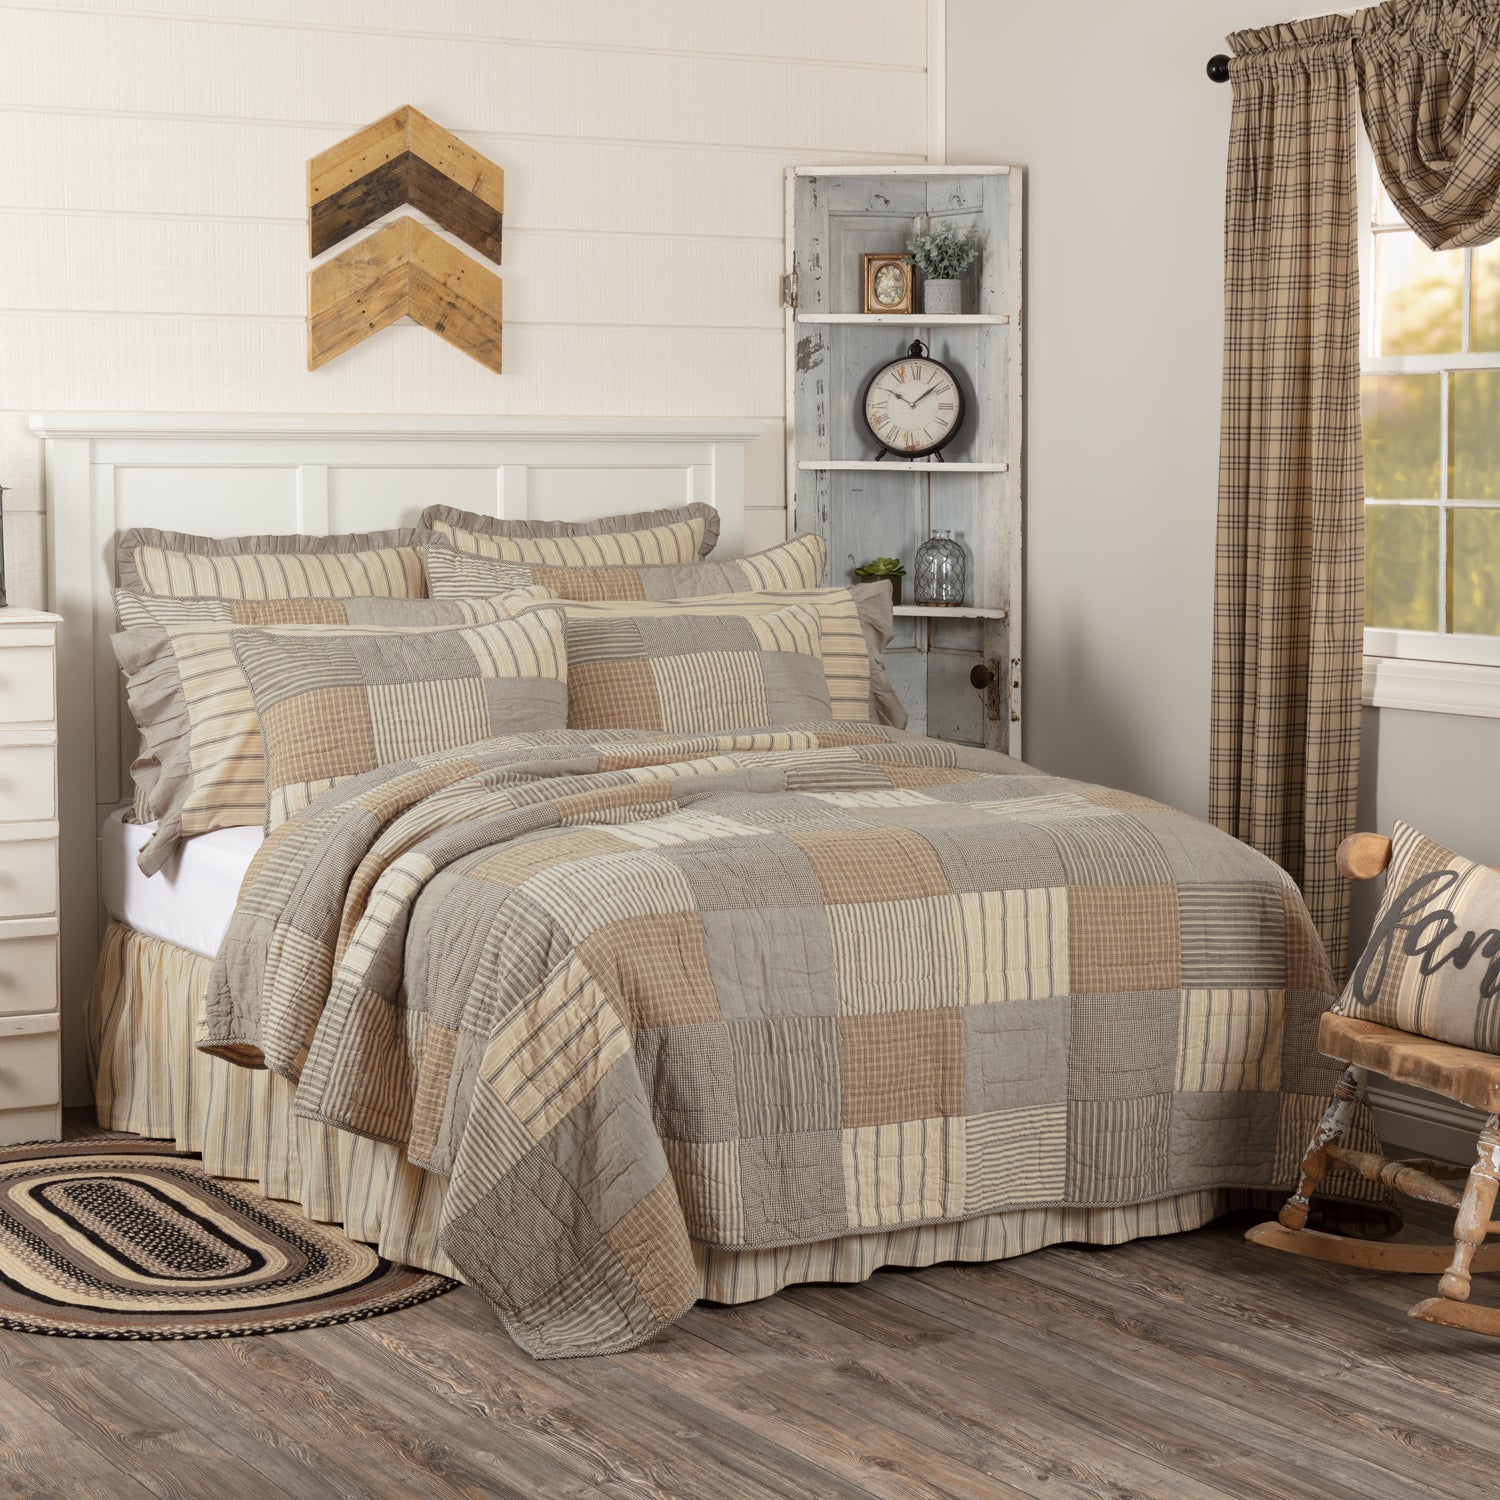 38034-Sawyer-Mill-Charcoal-Luxury-King-Quilt-120Wx105L-image-3